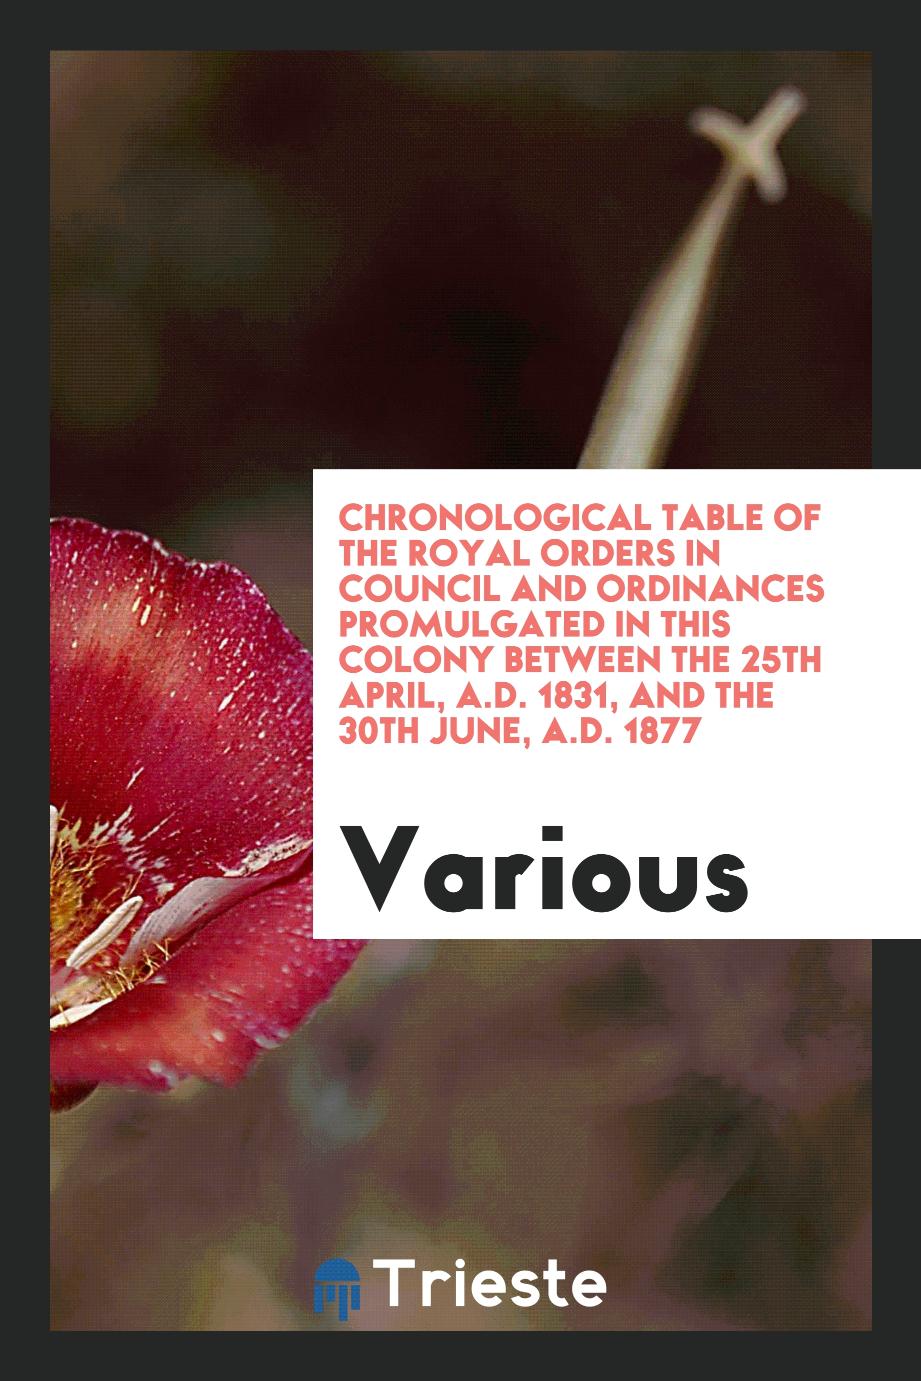 Chronological Table of the Royal Orders in Council and Ordinances Promulgated in This Colony Between the 25Th April, A.D. 1831, and the 30Th June, A.D. 1877